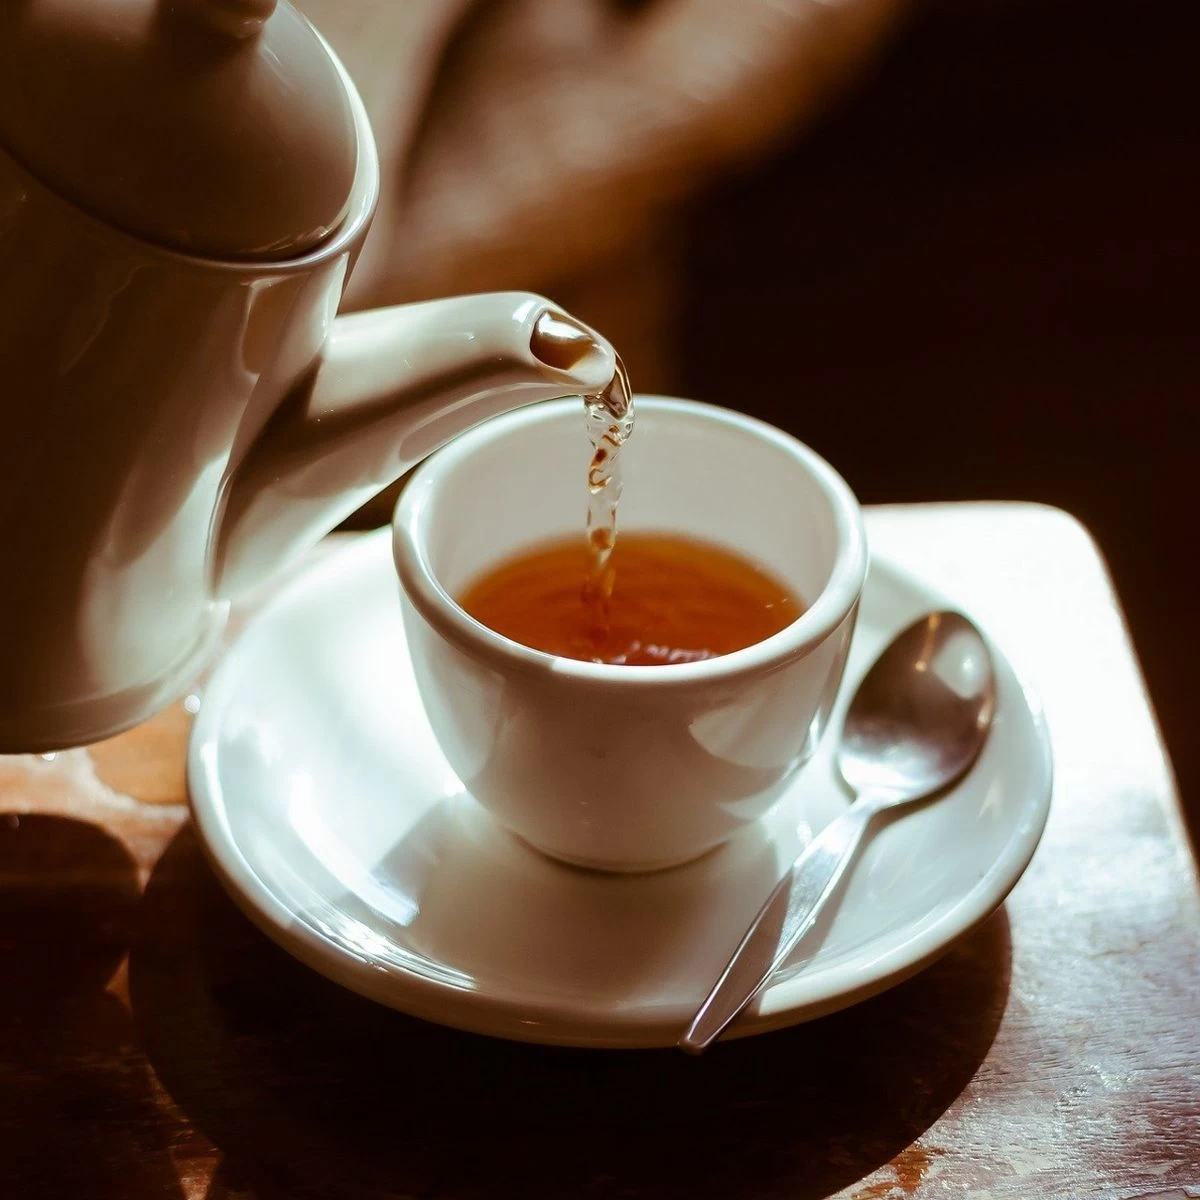 Tea lowers high blood pressure, research reveals